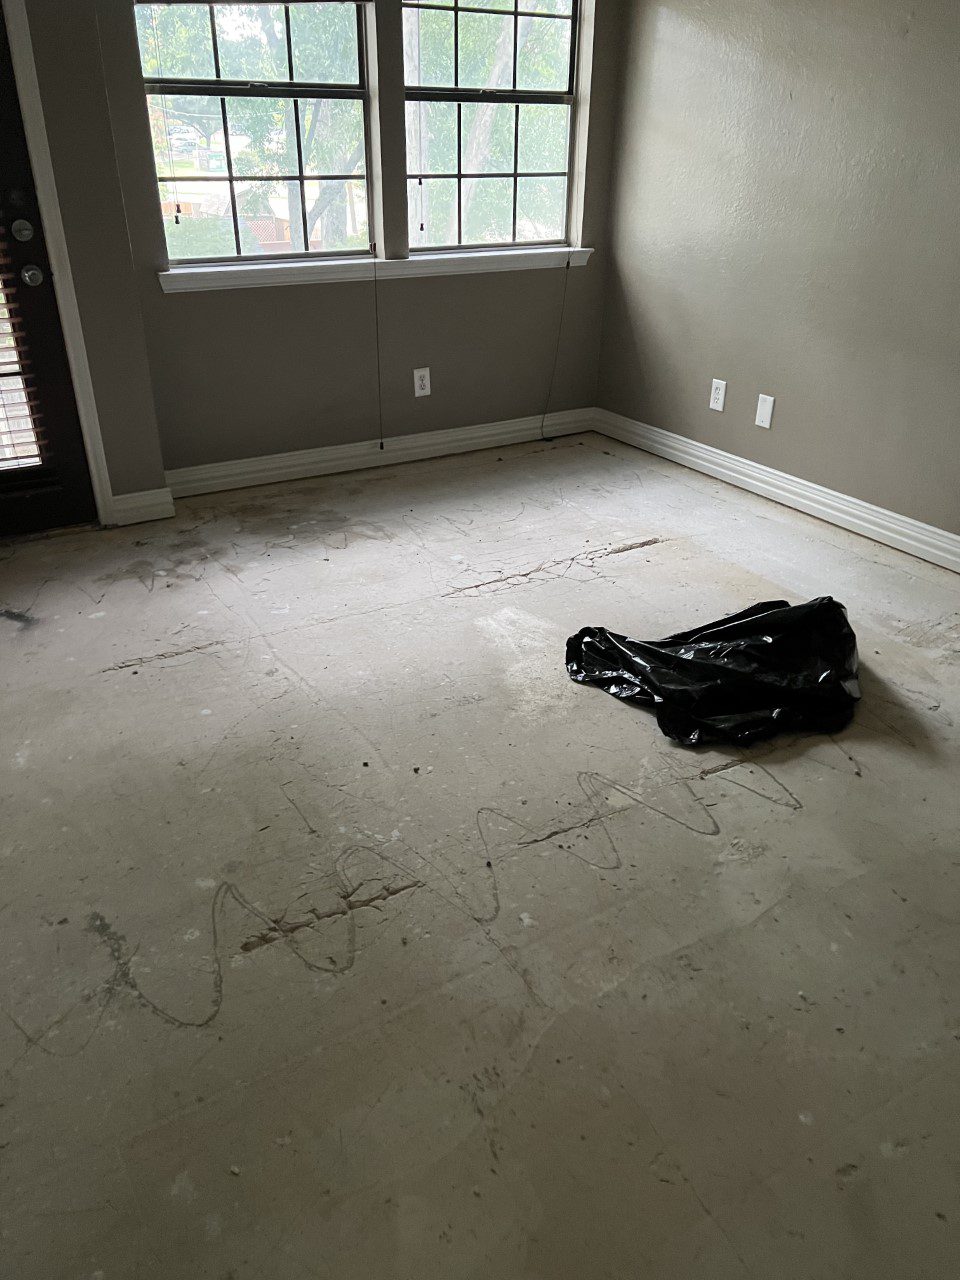 Exposed concrete floor with carpet glue residue and visible cracks after carpet removal, awaiting restoration and transformation.